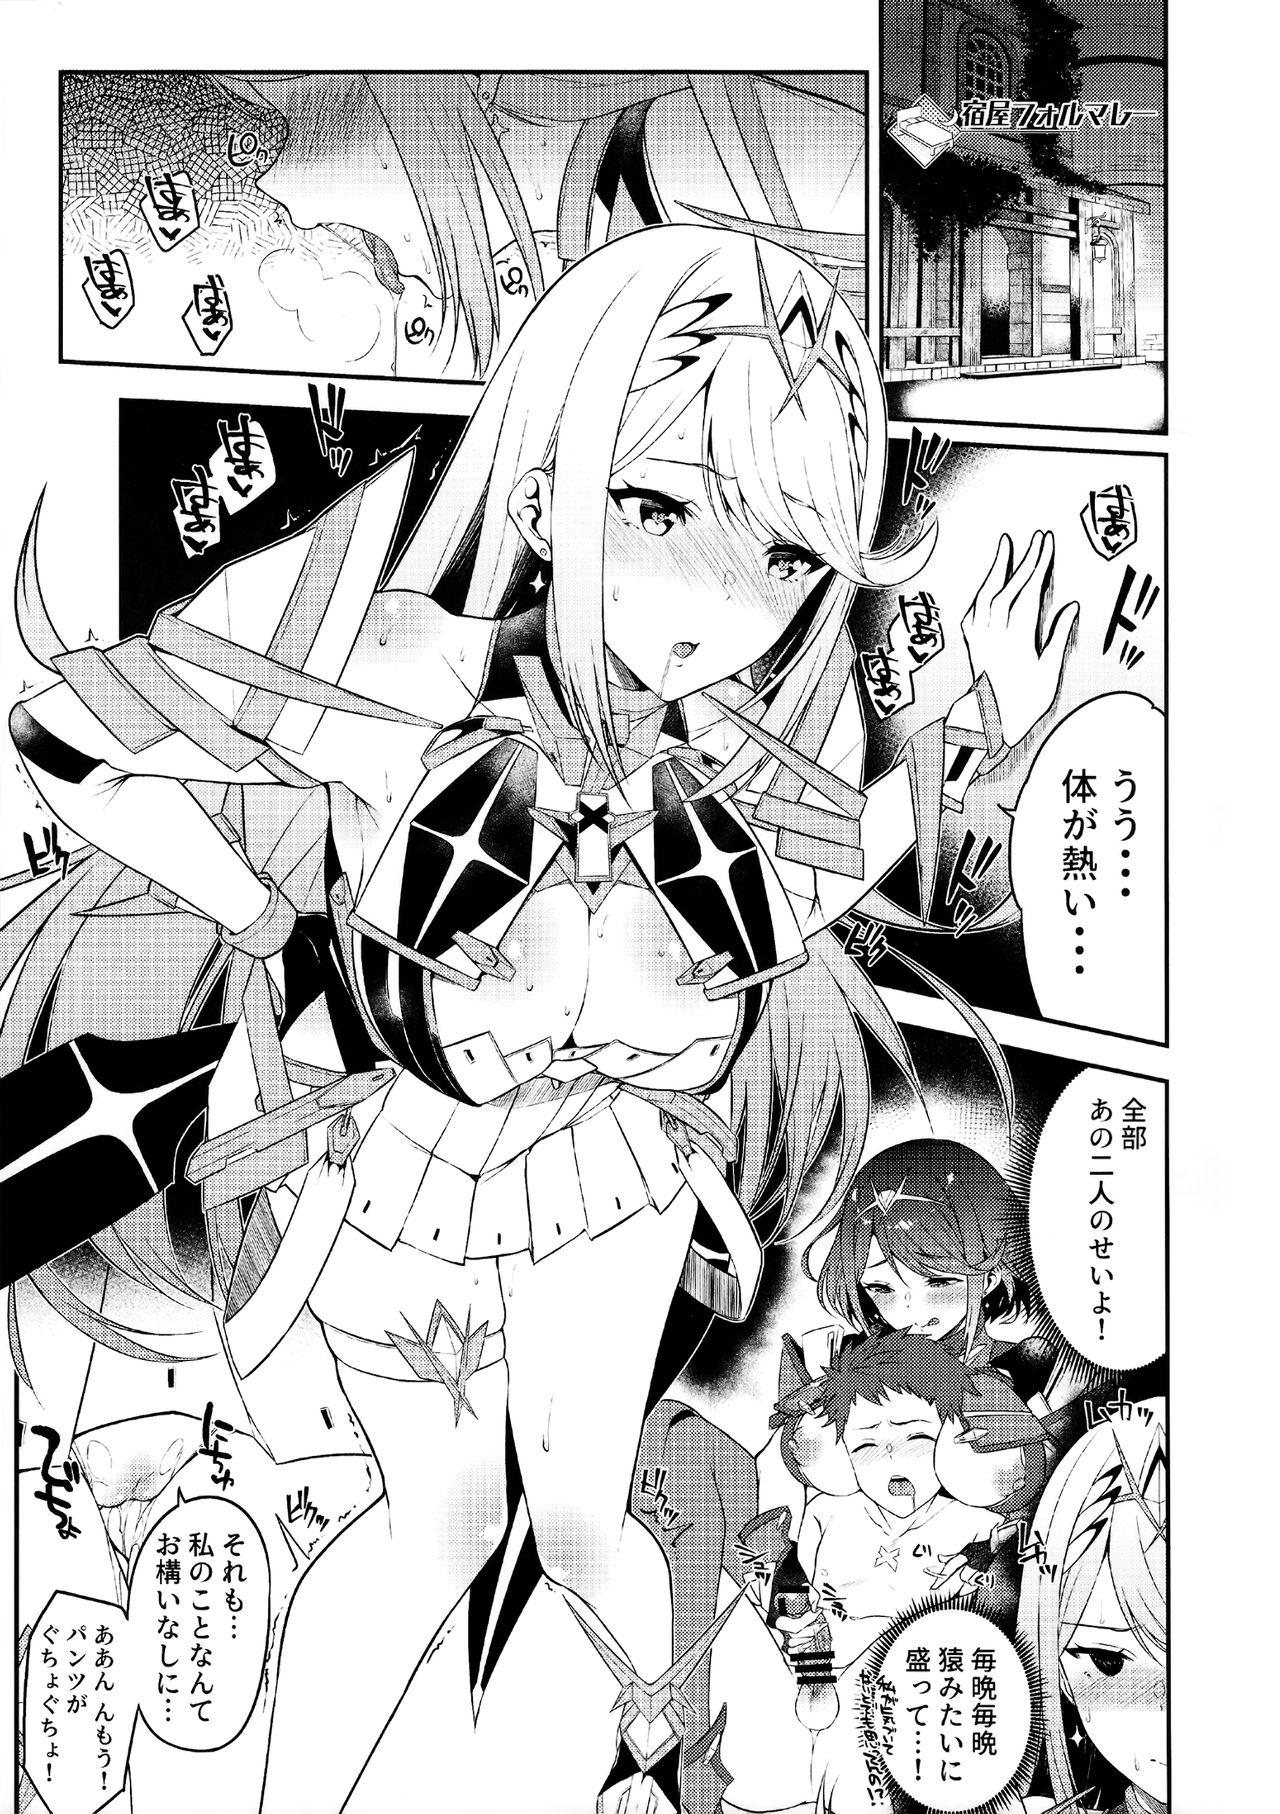 Domination Hikari Are - Xenoblade chronicles 2 Wife - Page 3